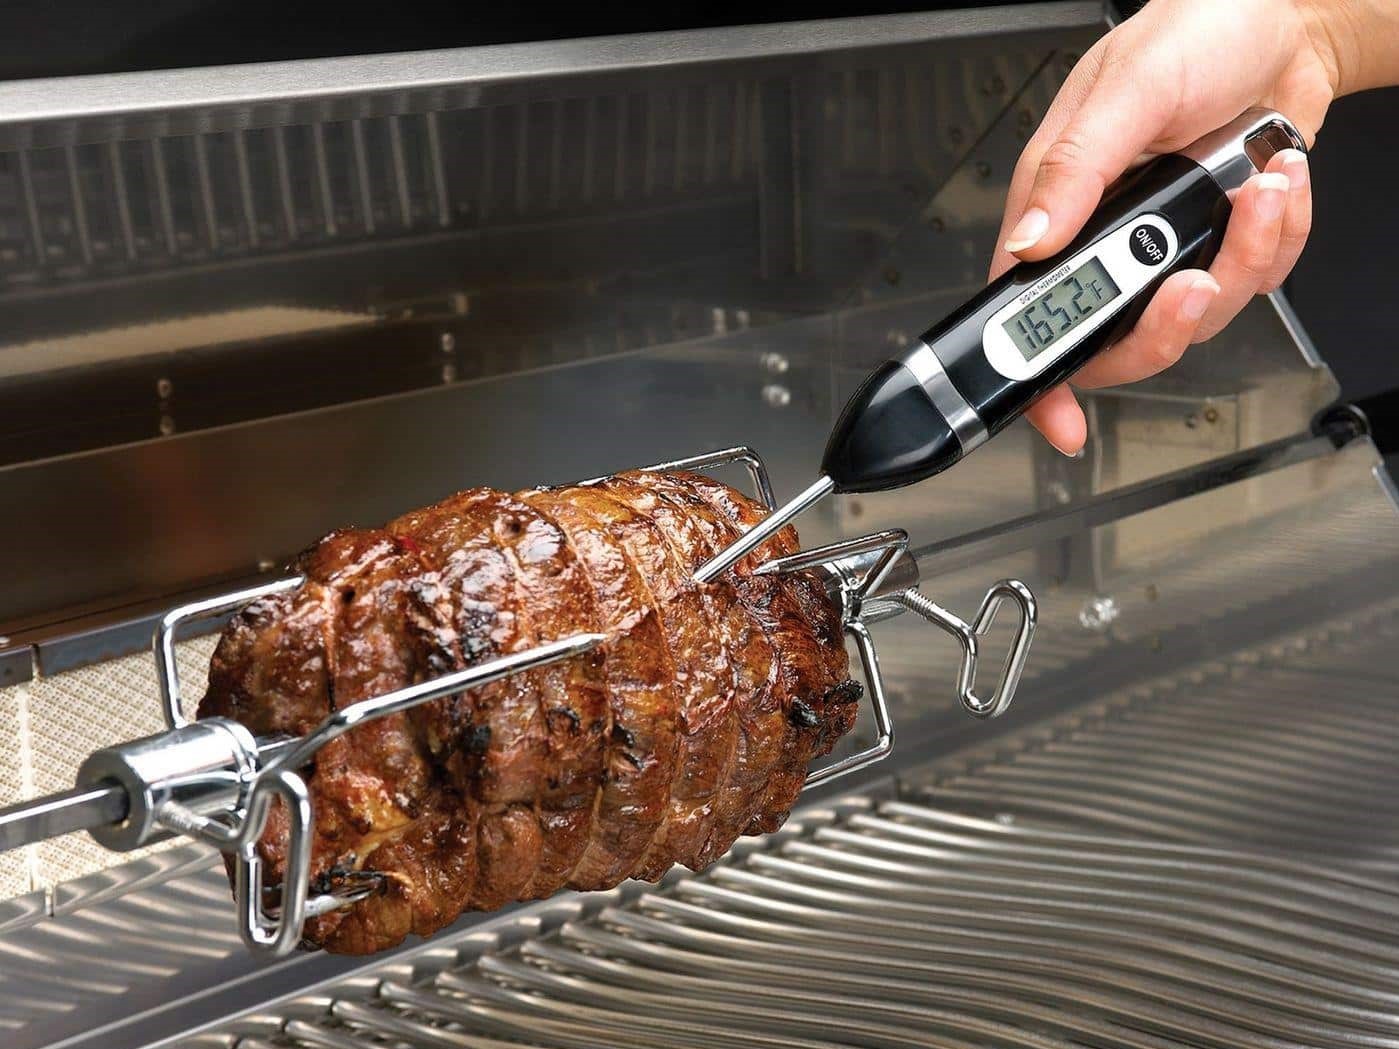 Digitales Grillthermometer